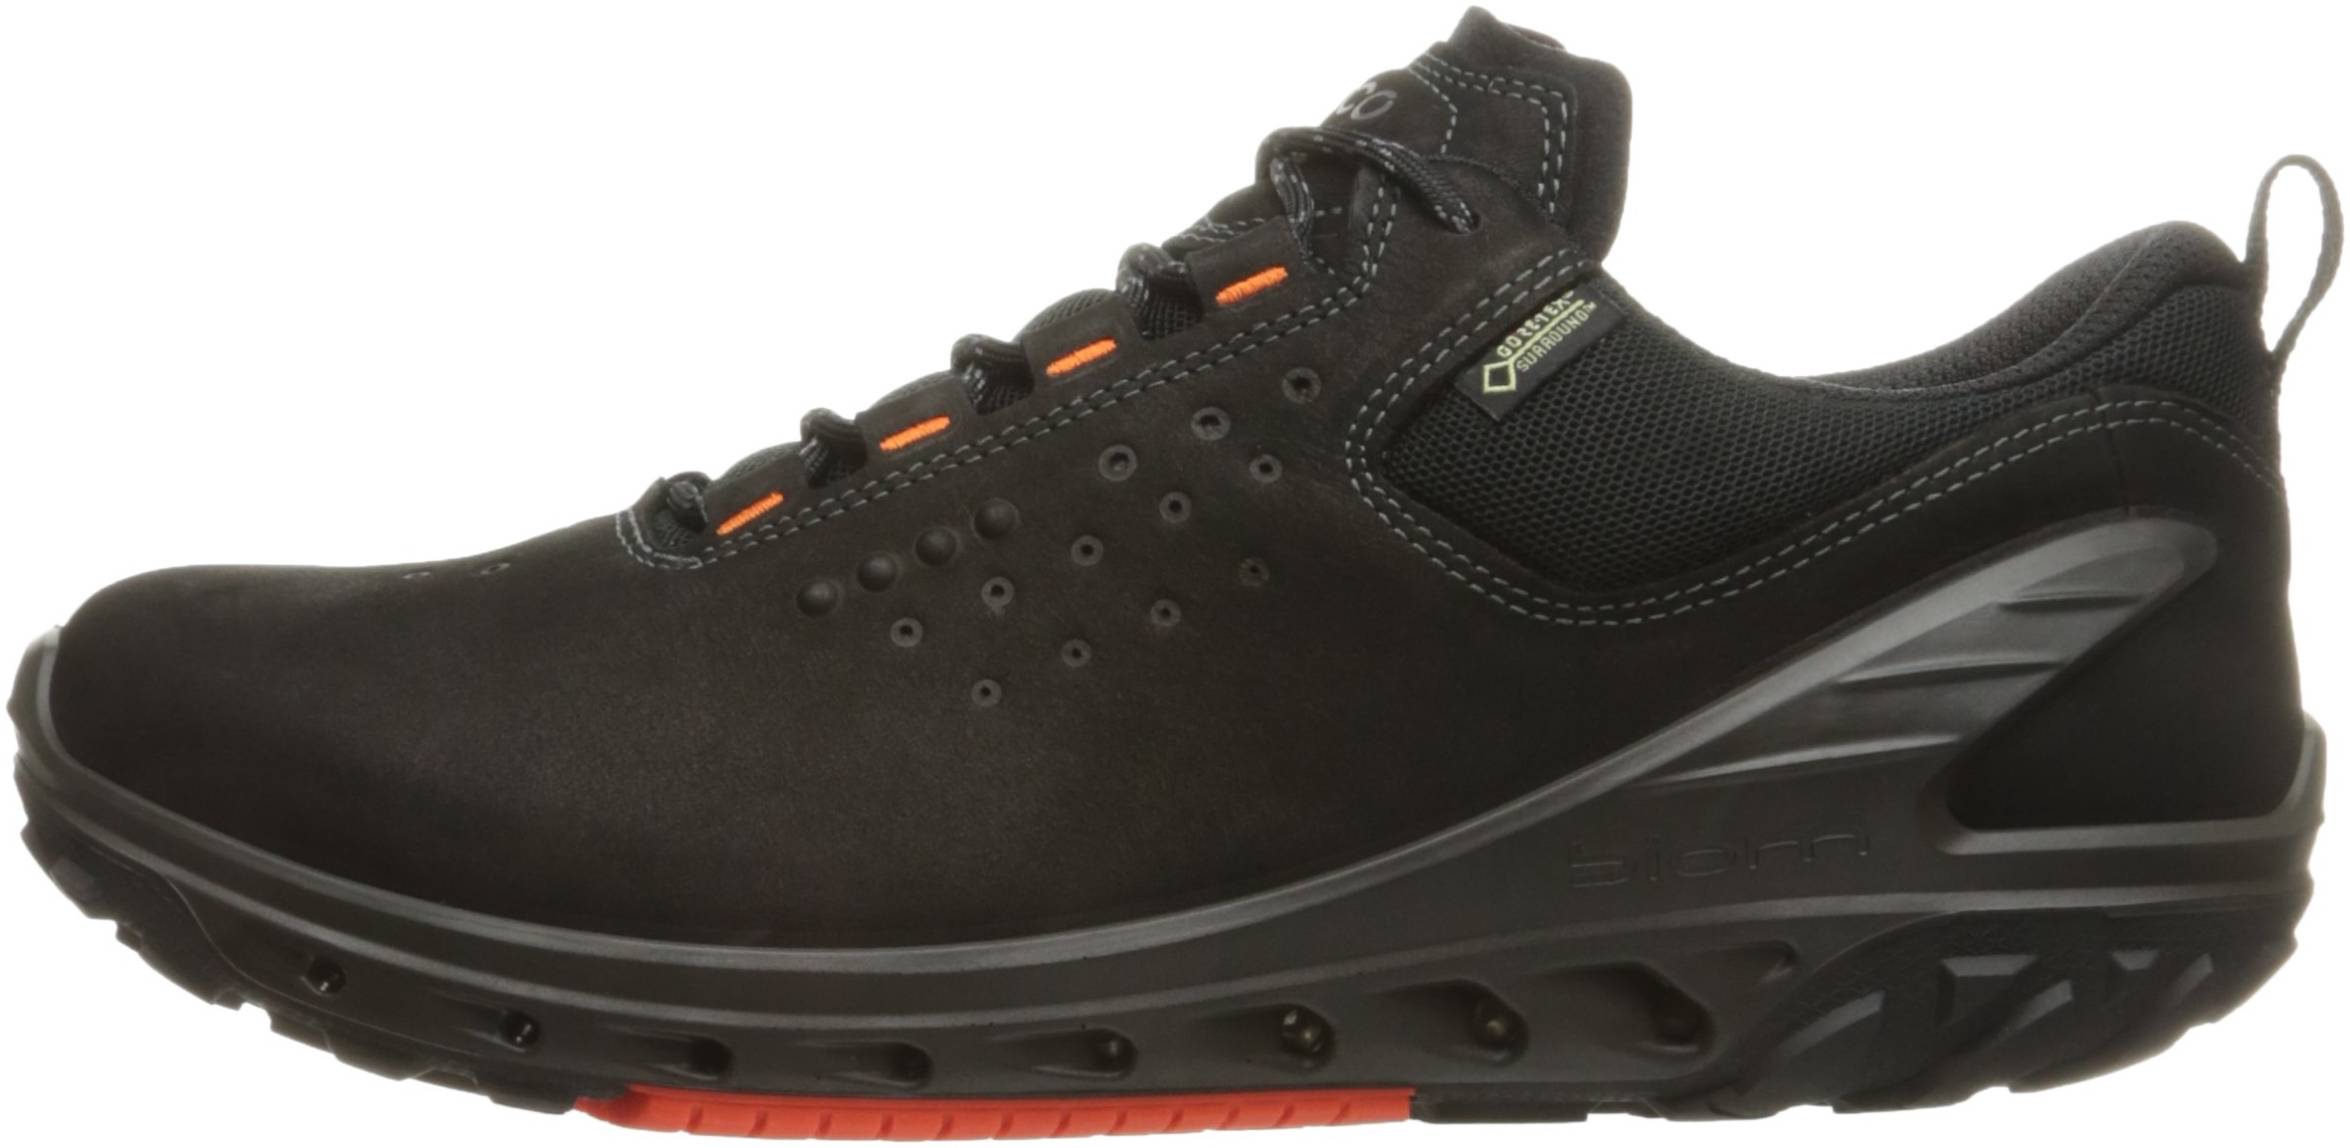 Save 47% on Ecco Sneakers (44 Models in 